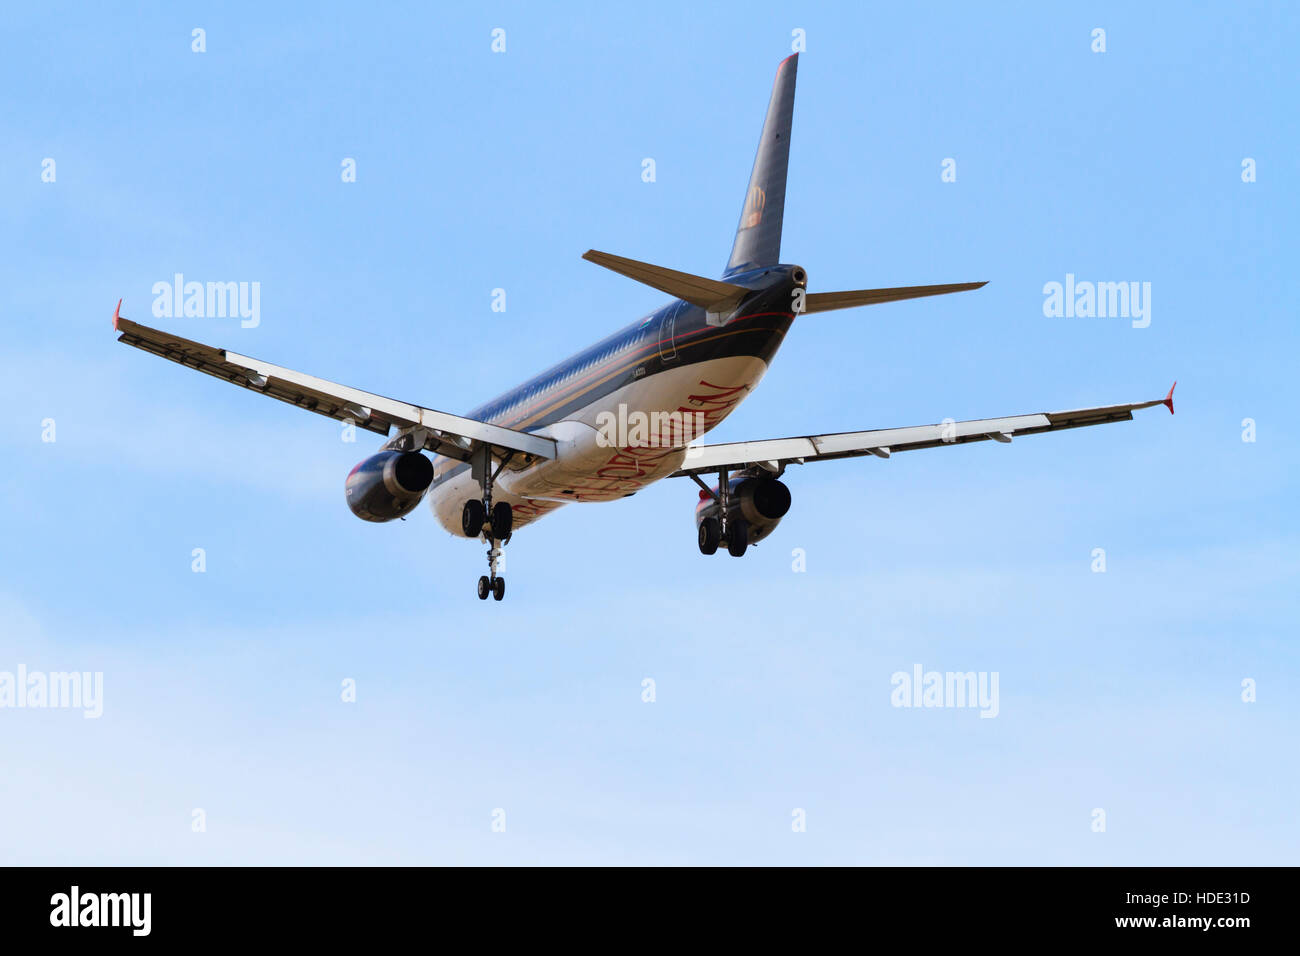 Airbus A320-232 , JY-AYQ, of Royal Jordanian airline on approach to Larnaca airport, Cyprus. Canon 7D, Canon 100-400f4 Stock Photo